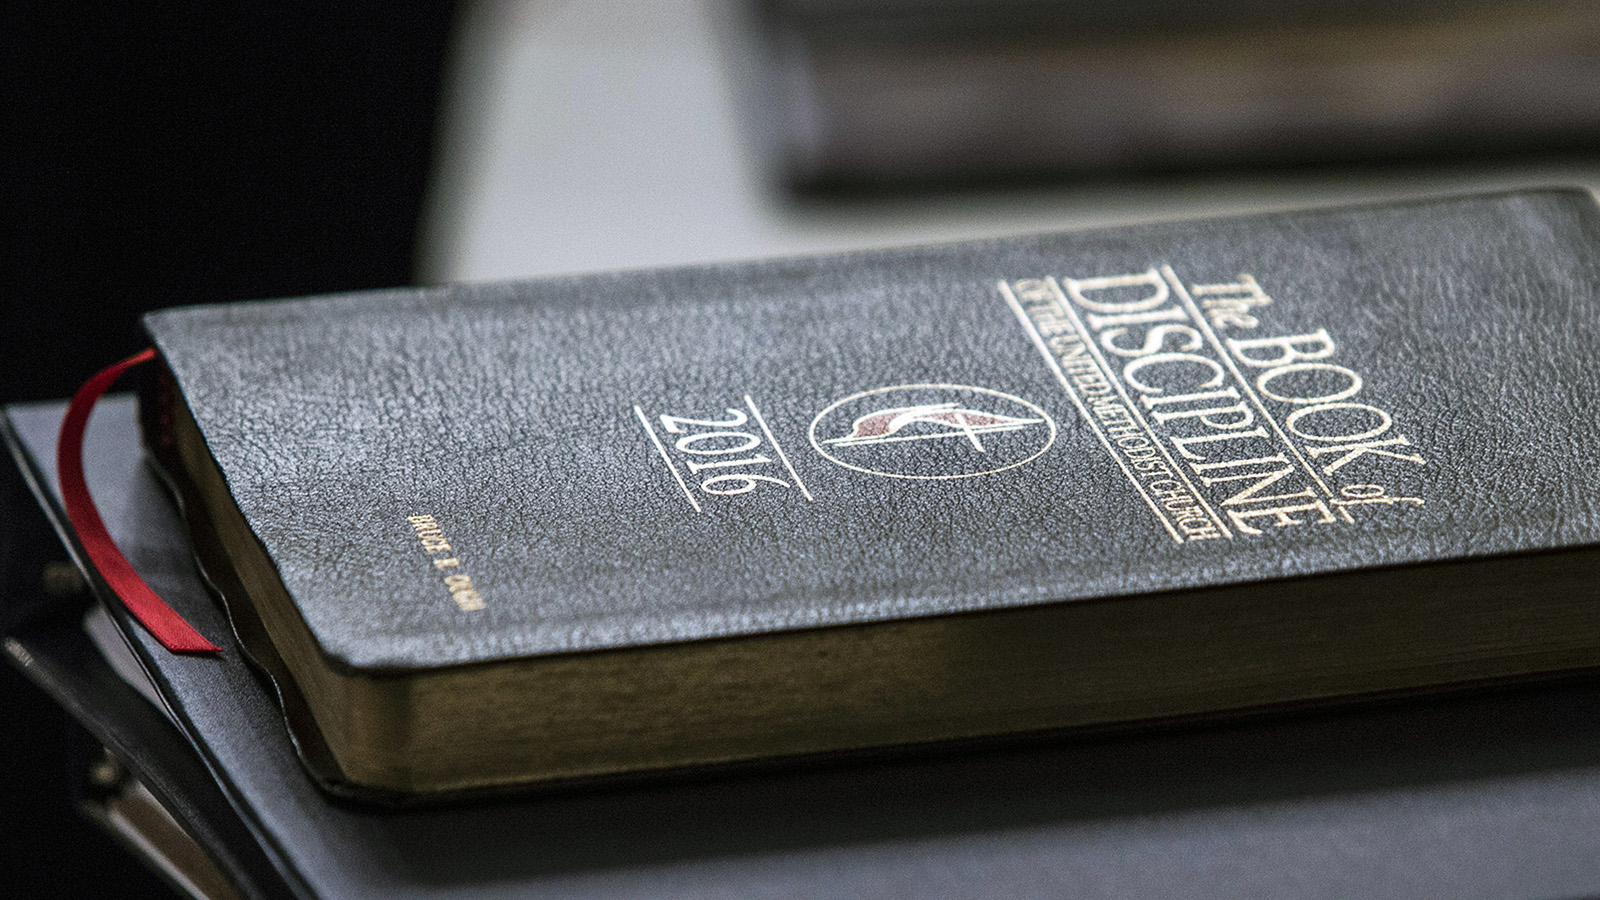 A copy of the Book of Discipline rests on a table during an oral hearing on May 22, 2018, in Evanston, Ill. The United Methodist Judicial Council, the denomination’s top court, heard arguments regarding a request from the Council of Bishops for a ruling on whether United Methodist organizations, clergy or lay members can submit petitions for the special General Conference in 2019. The hearing was part of the court’s May 22-25 special session. Photo by Kathleen Barry/UMNS